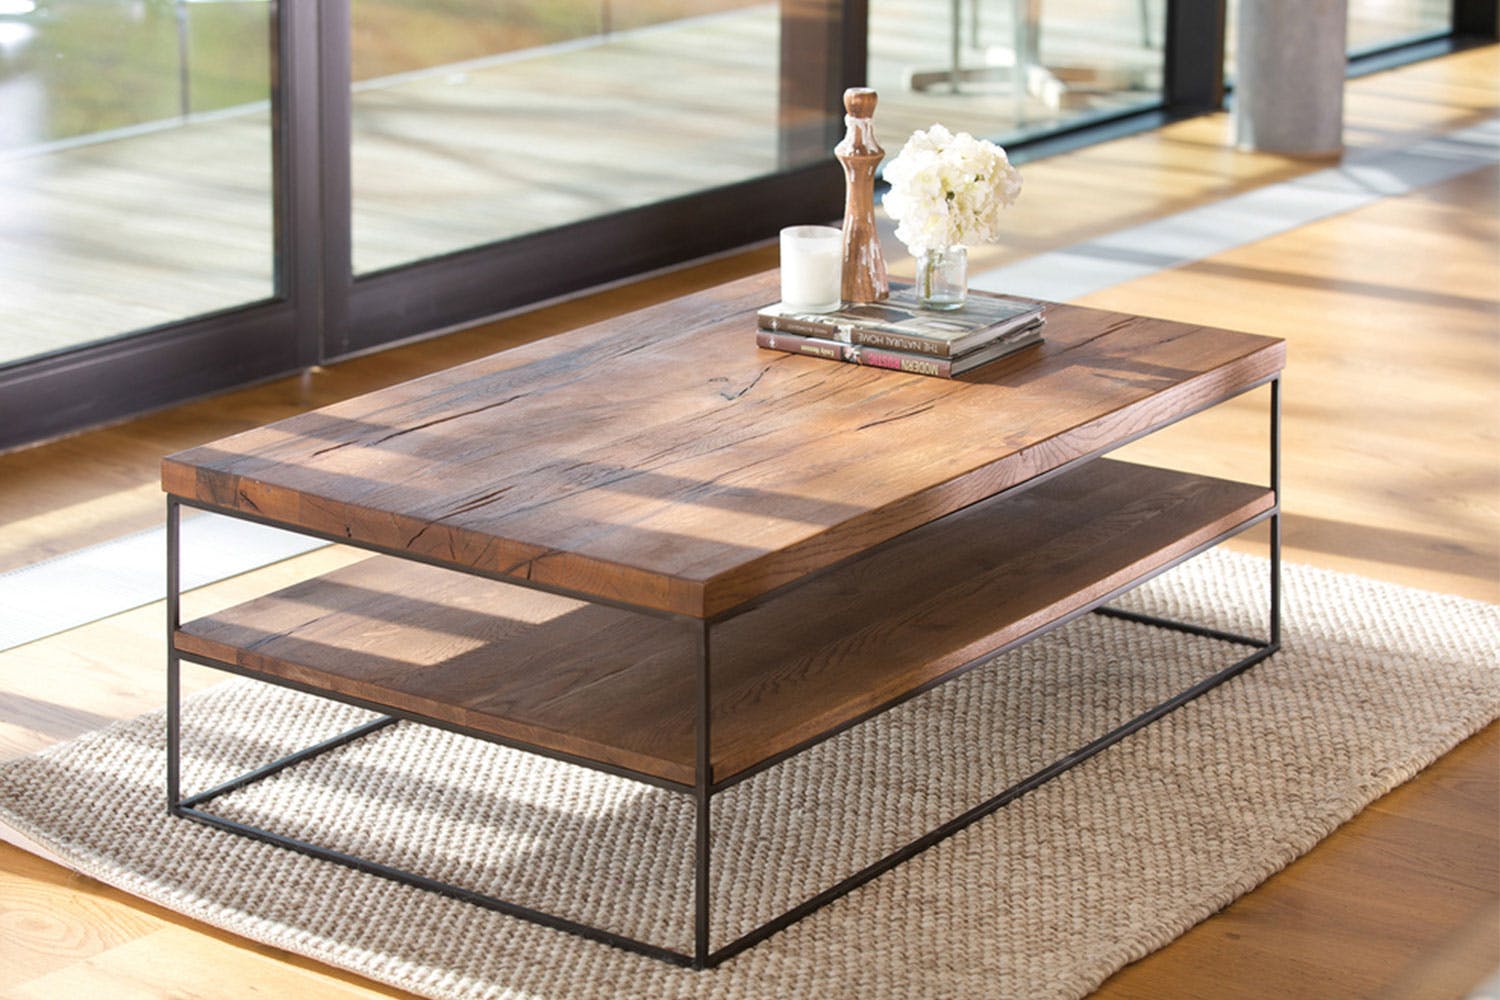 Top 10 Brands To Buy Coffee Tables Online Instore Fif Blog